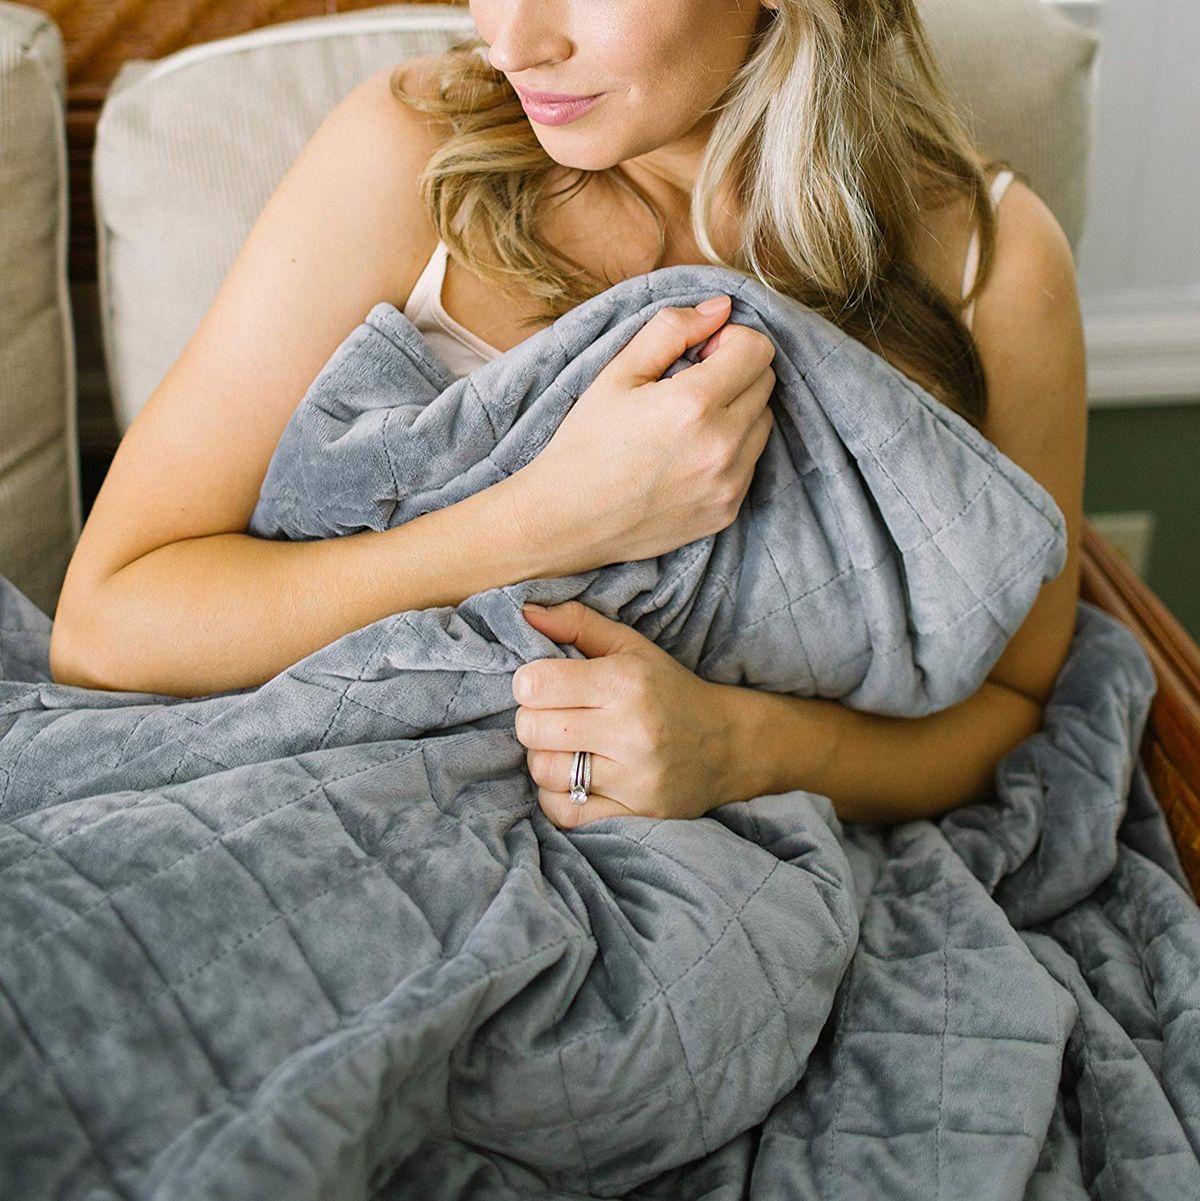 A weighted blanket helps you sleep and reduces stress – here's why, and